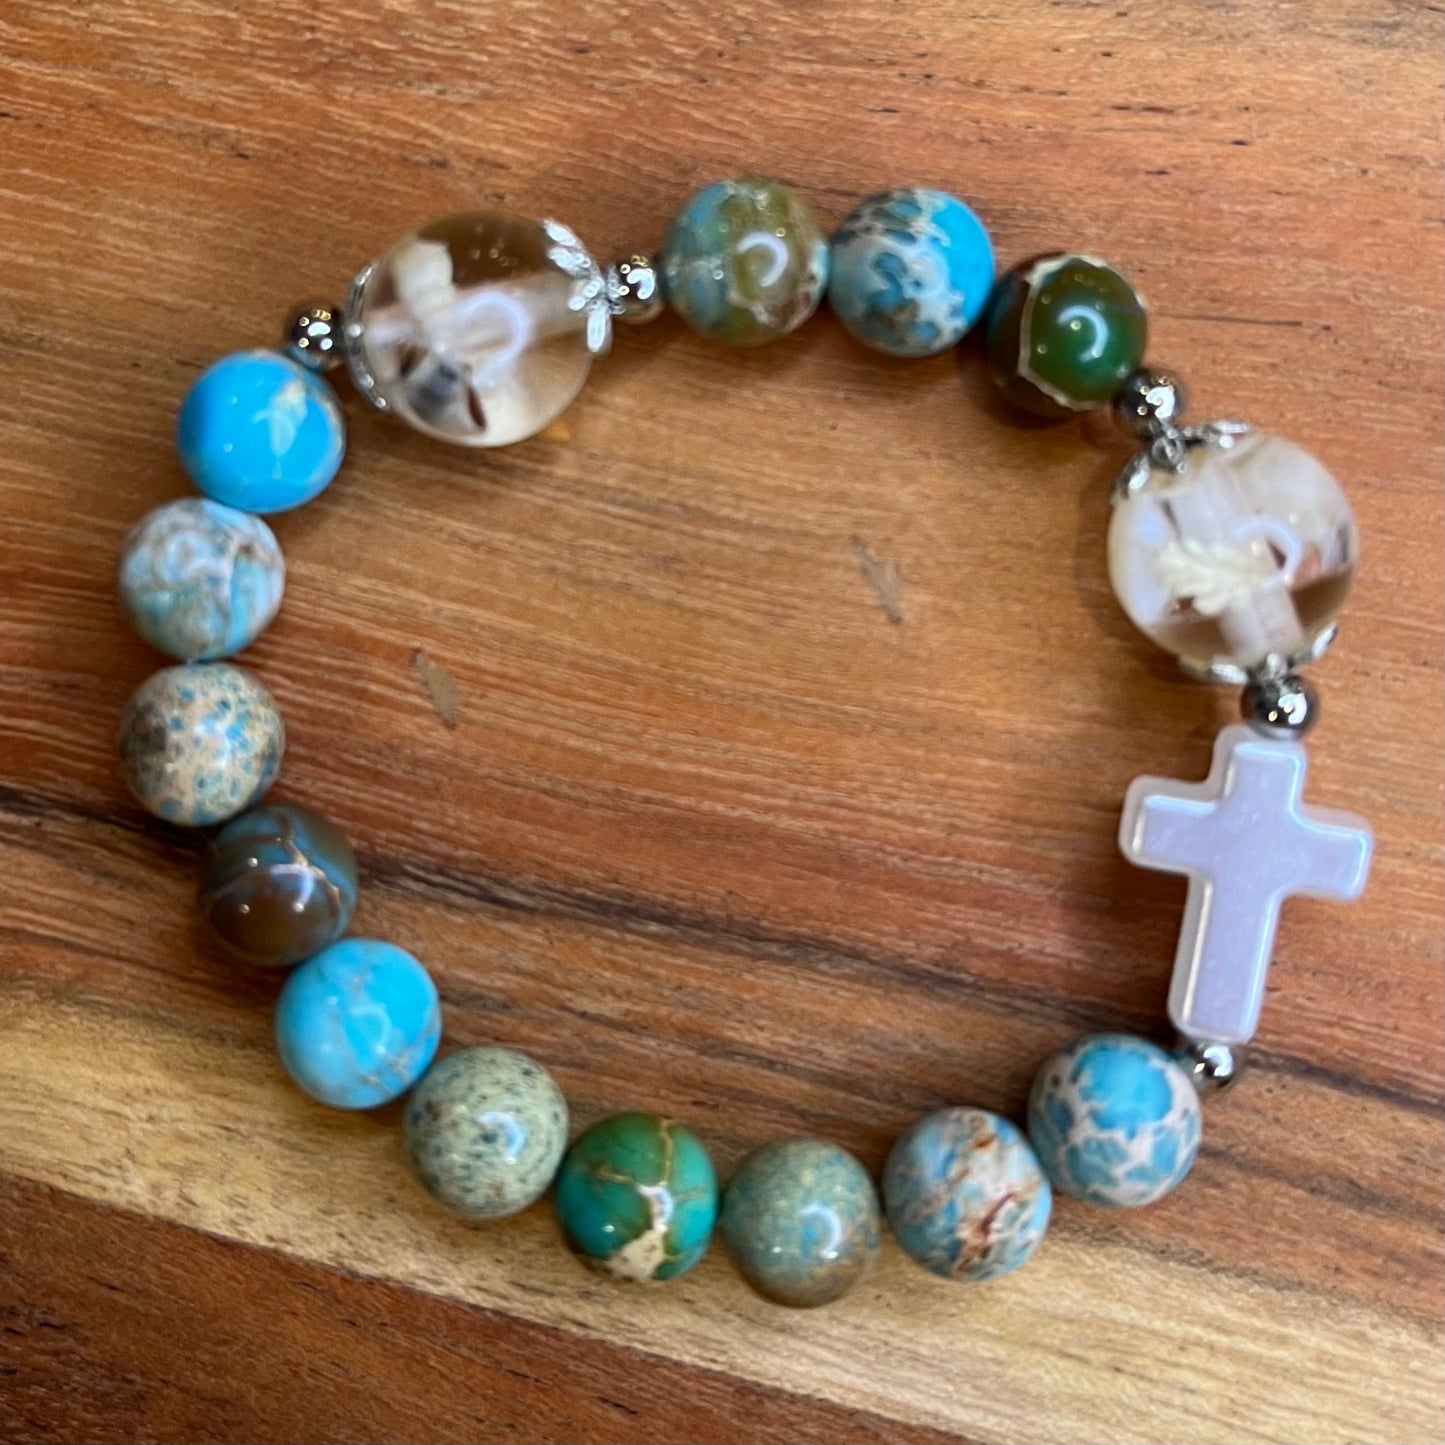 Rosary Bracelet inspired by Our Lady Star of the Sea (blue) - Australian Flower Series